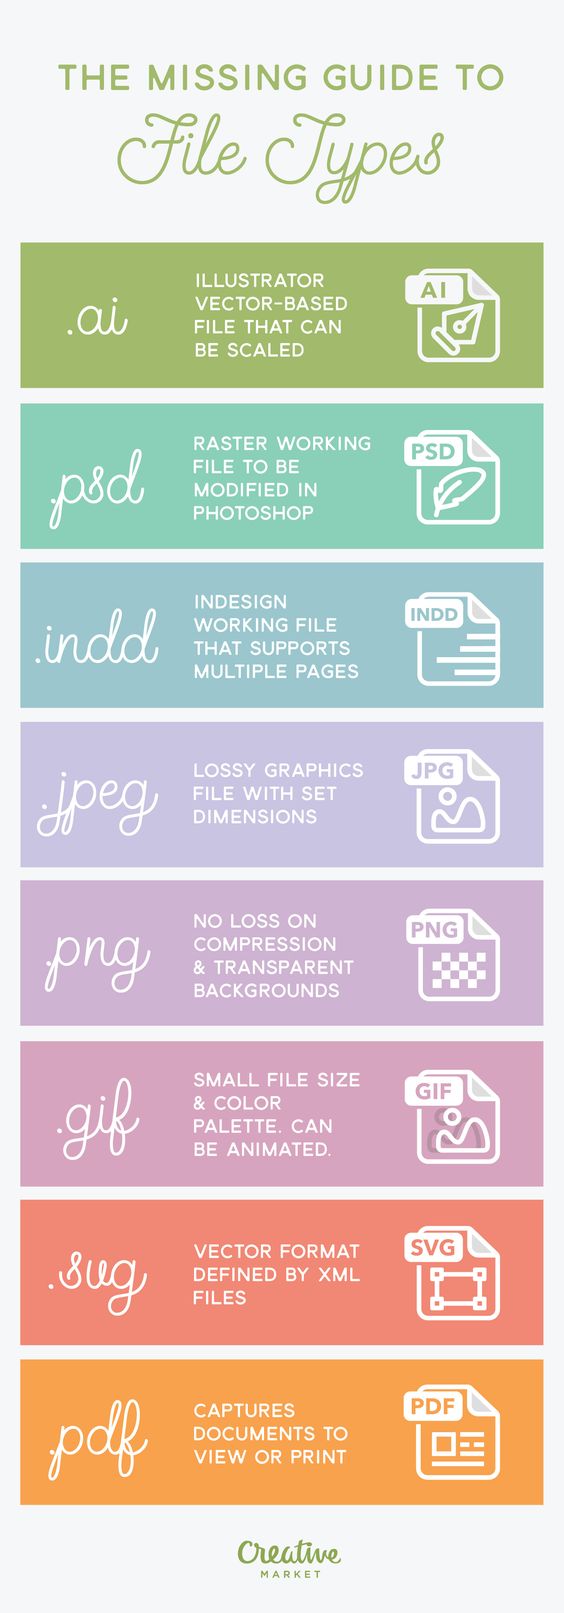 Different file types serve various purposes, each with its own advantages and disadvantages. The pros and cons of a particular file type are what may make it more useful over another.